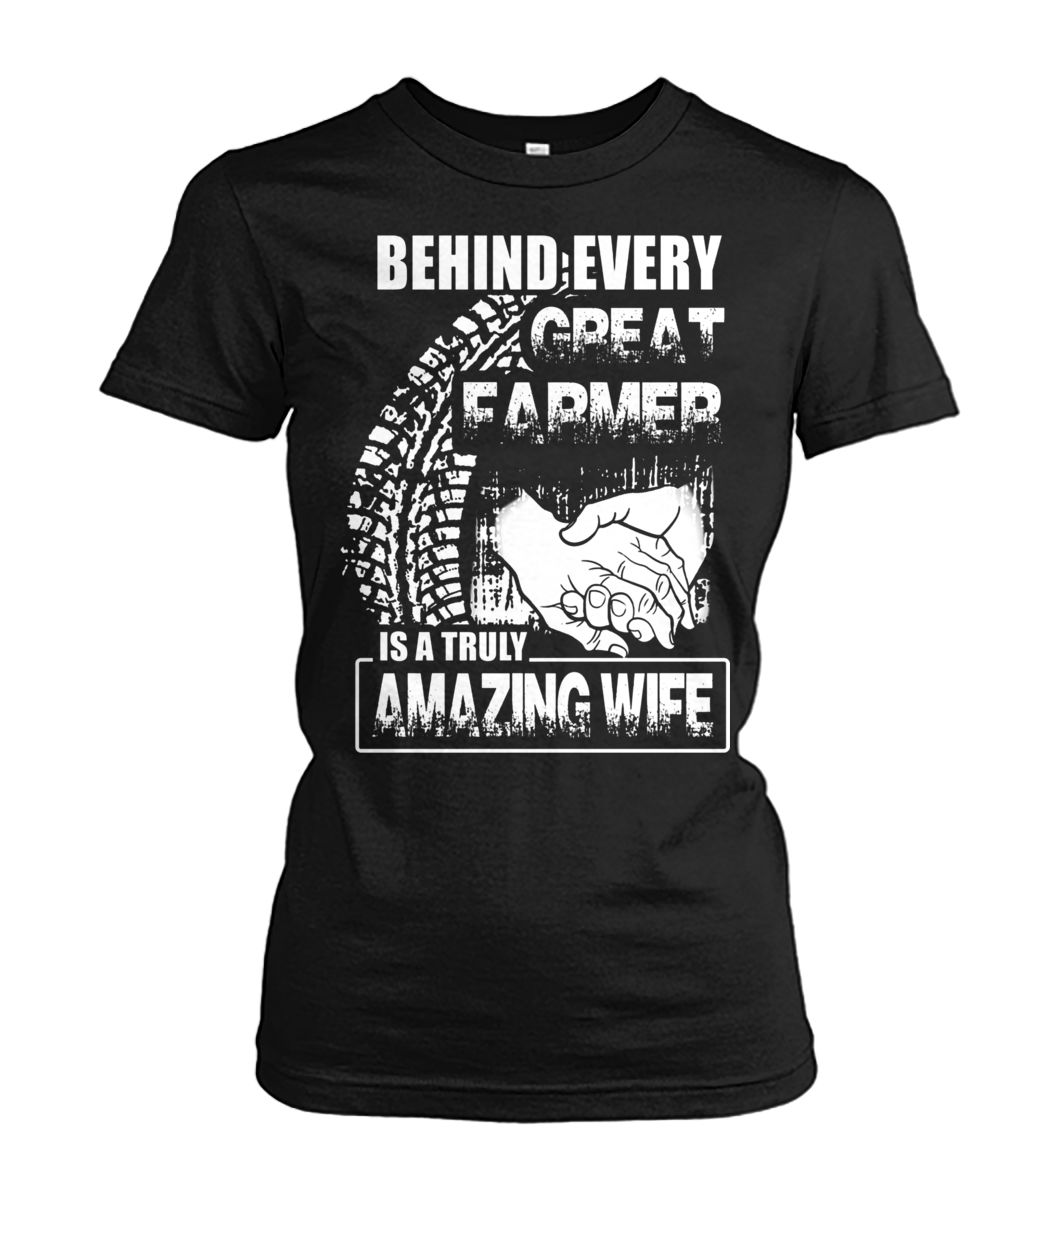 Behind every great farmer is a truly amazing wife women's crew tee